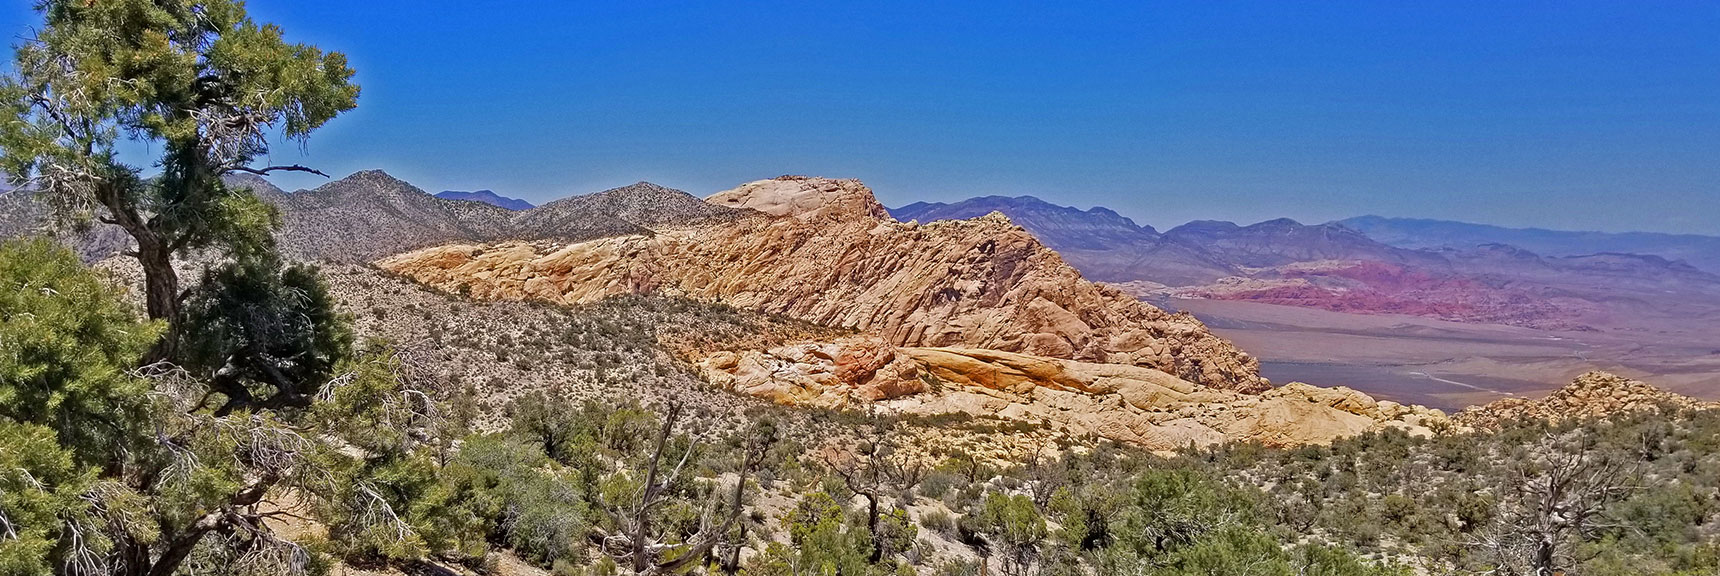 Indecision Peak with Mt. Wilson in Background. Calico Hills to Lower Right. | Rainbow Mountains Upper Crest Ridge, Nevada